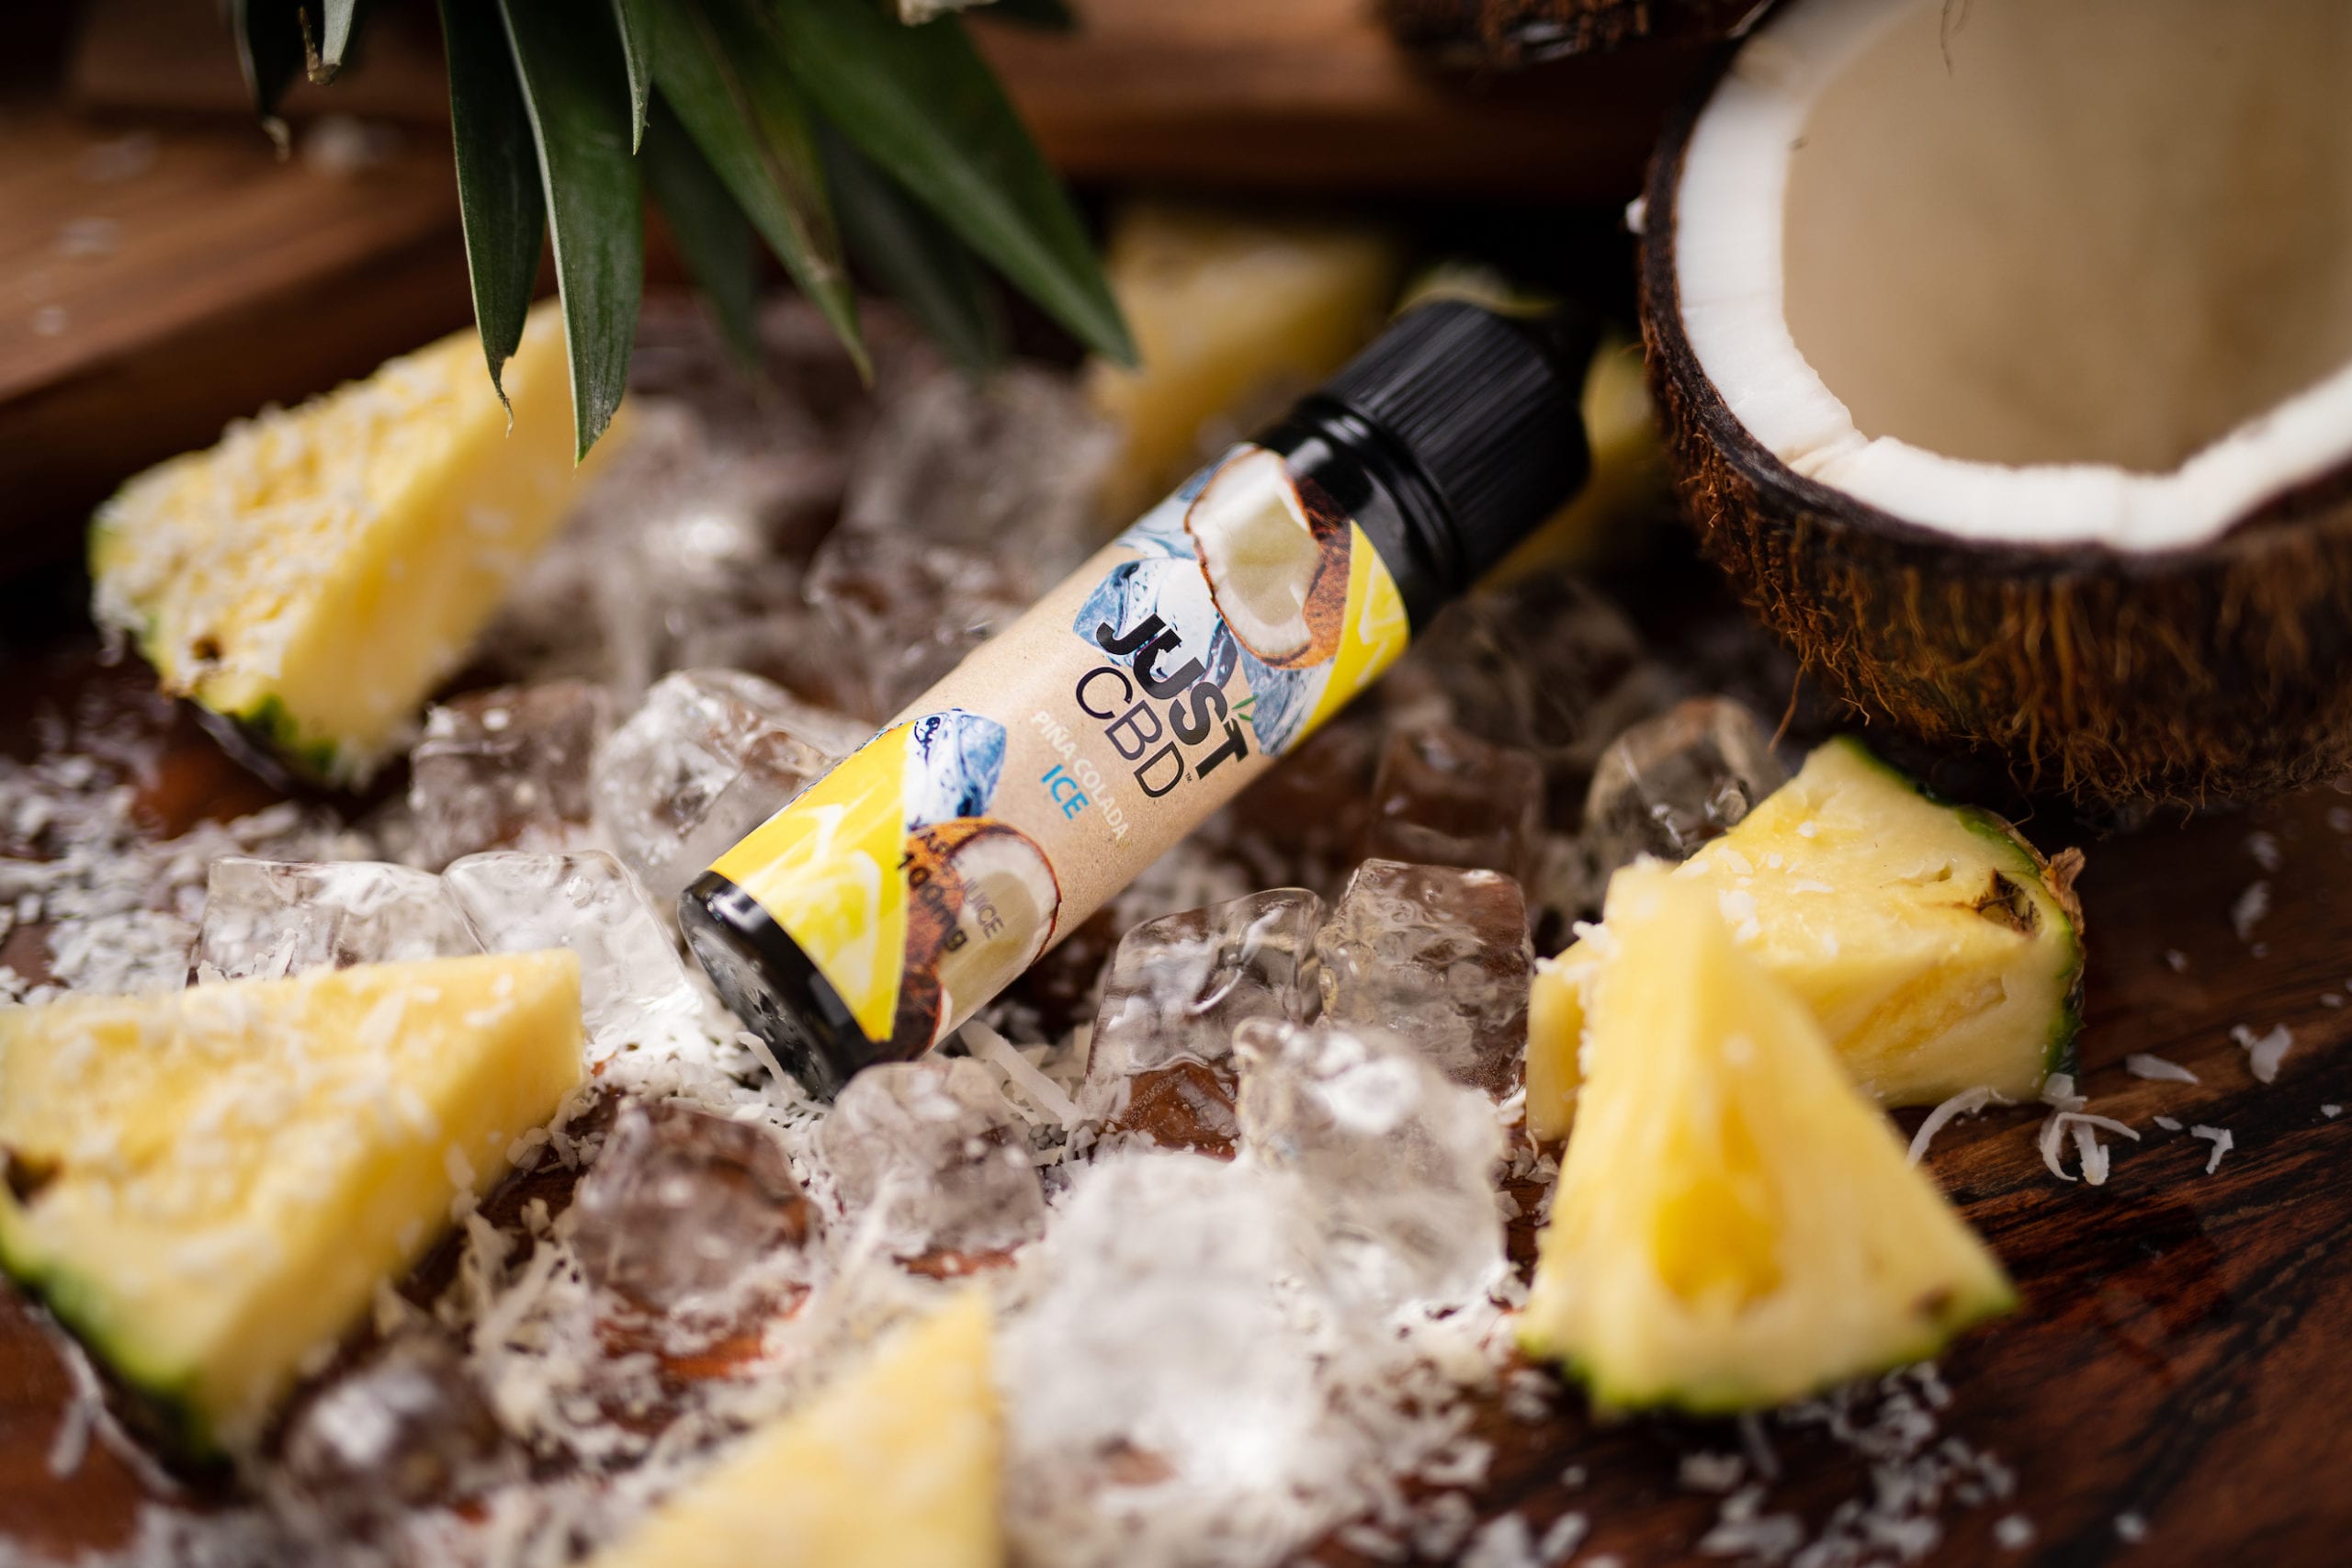 IU C&I Studios Portfolio JustCBD Product Photography and Just CBD Products Pina Colada ICE vape juice container on display surrounded with chunks of pineapple and coconut